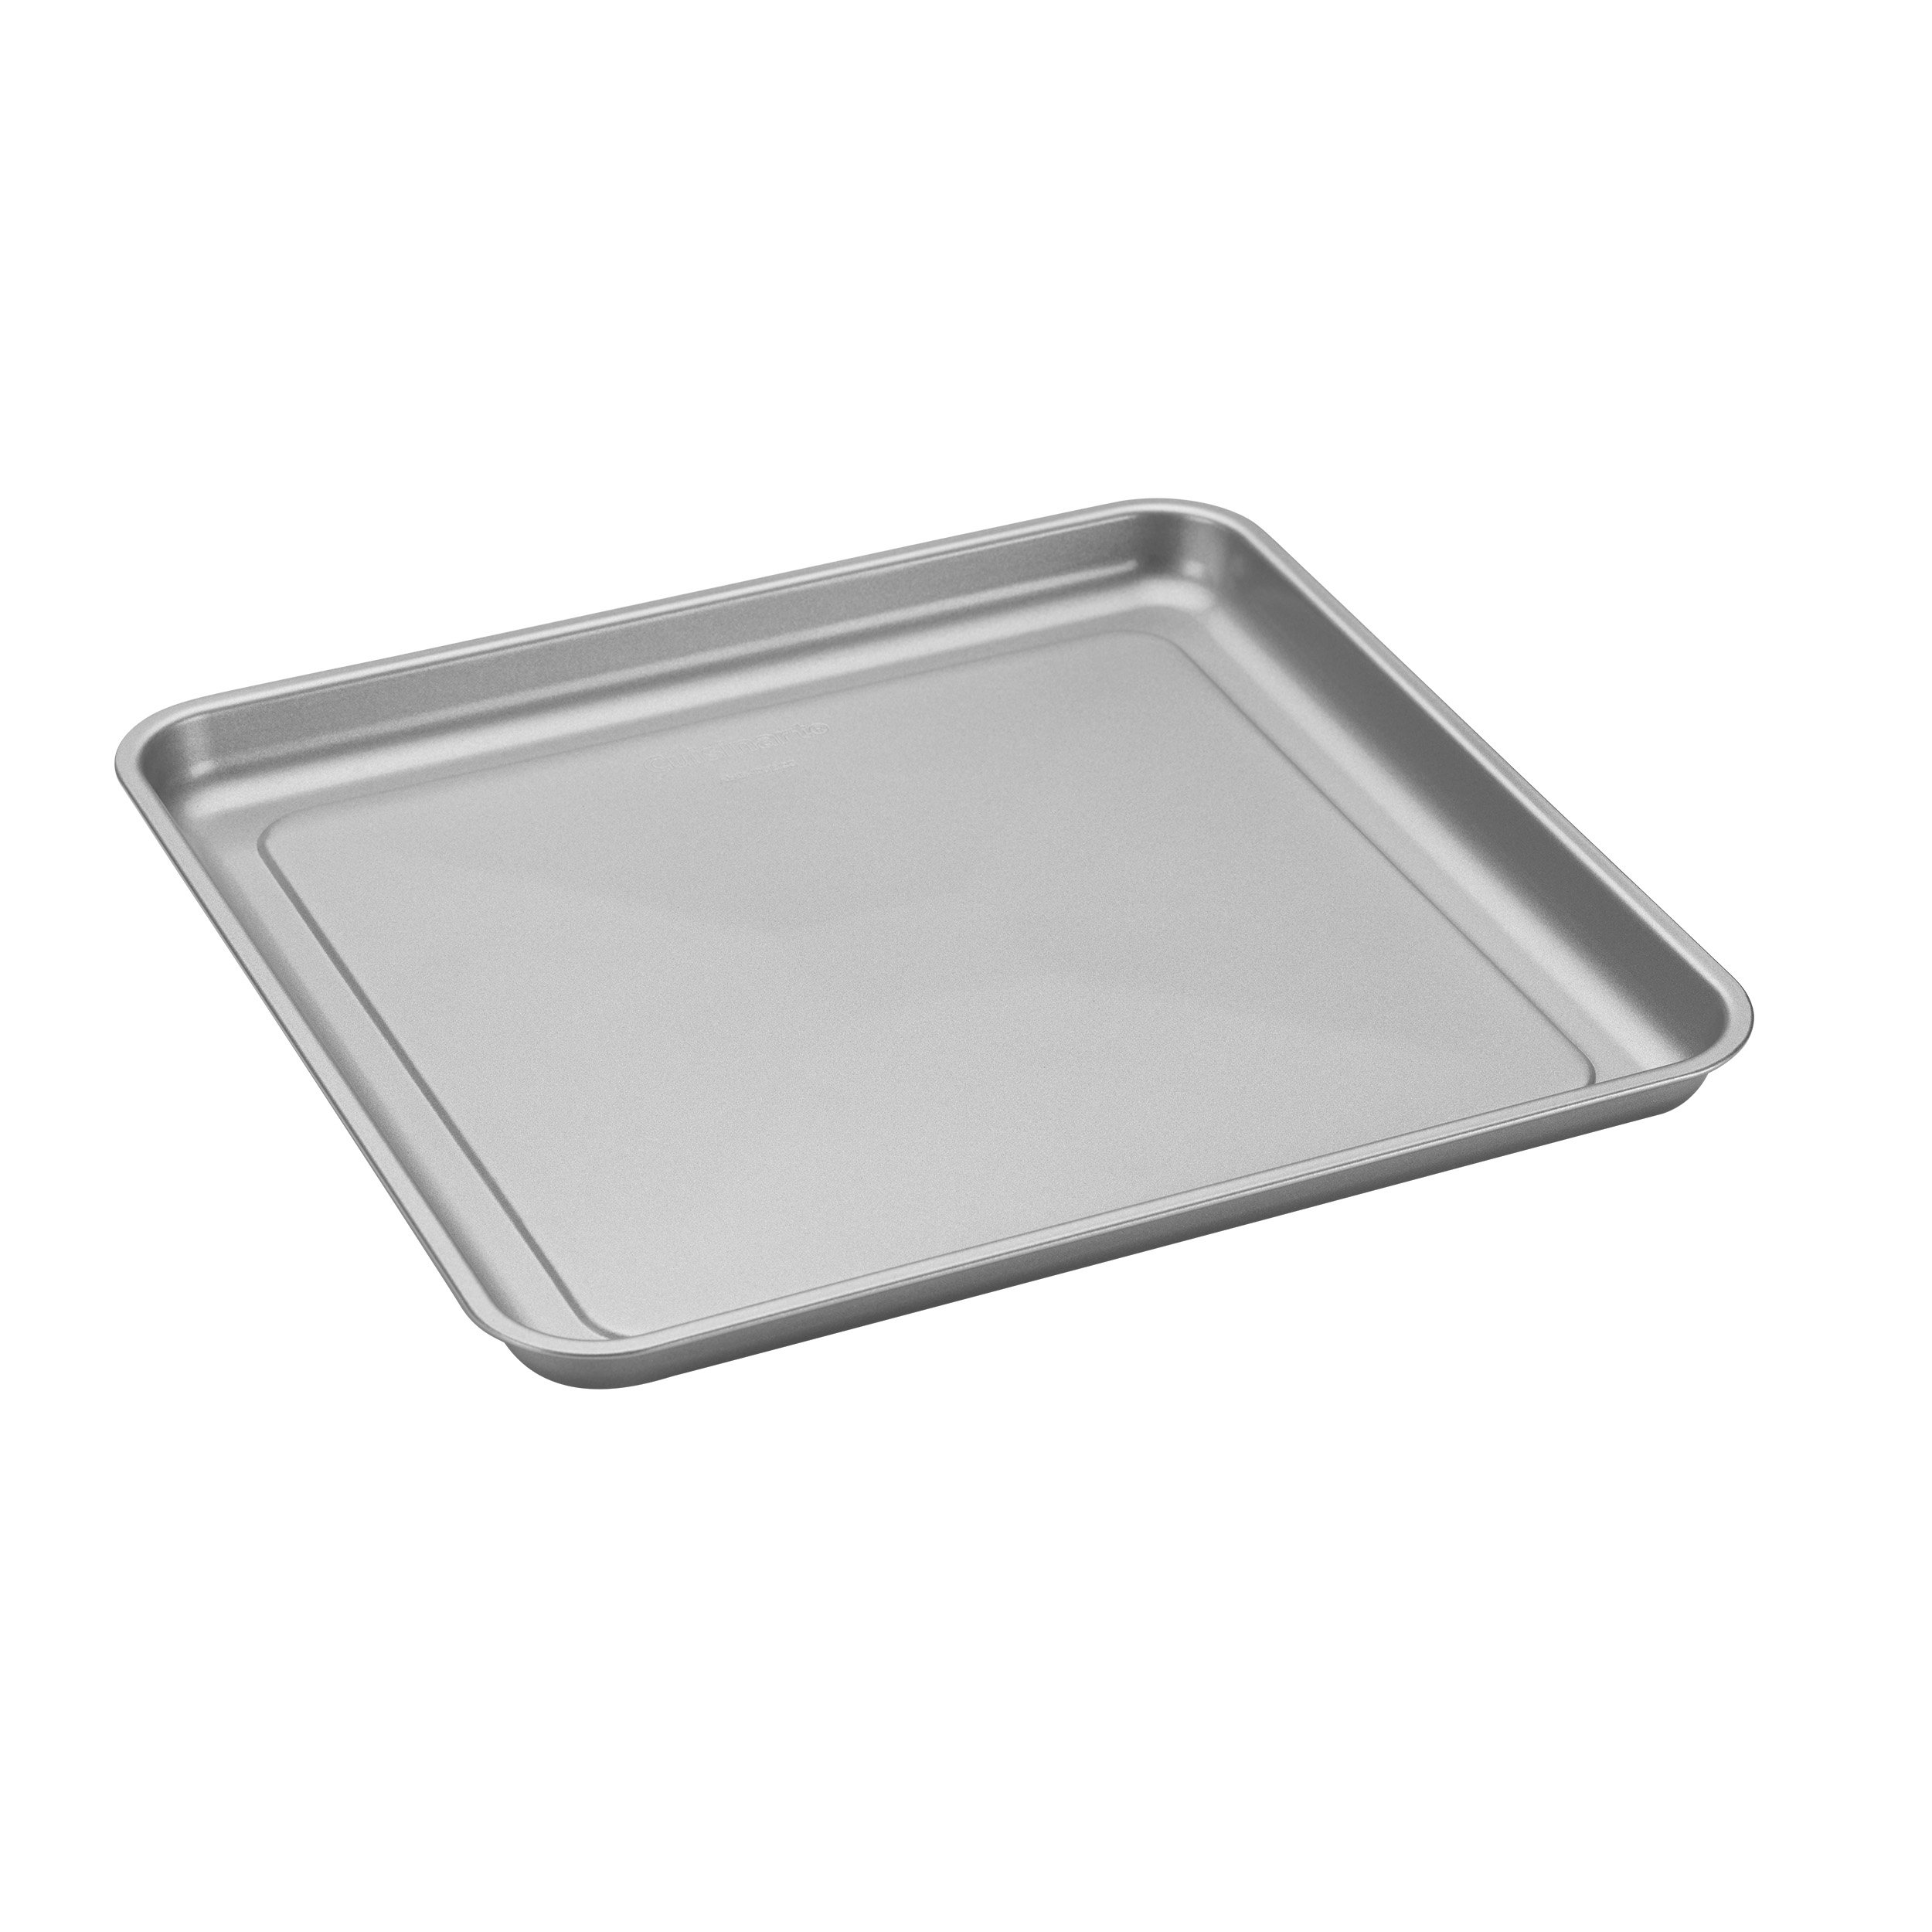 Stainless Steel Cuisinart Toaster Oven Tray Replacement, Dishwasher Safe  Cuisinart Air Fryer Toaster Oven Replacement Tray, Fit for Cuisinart Air